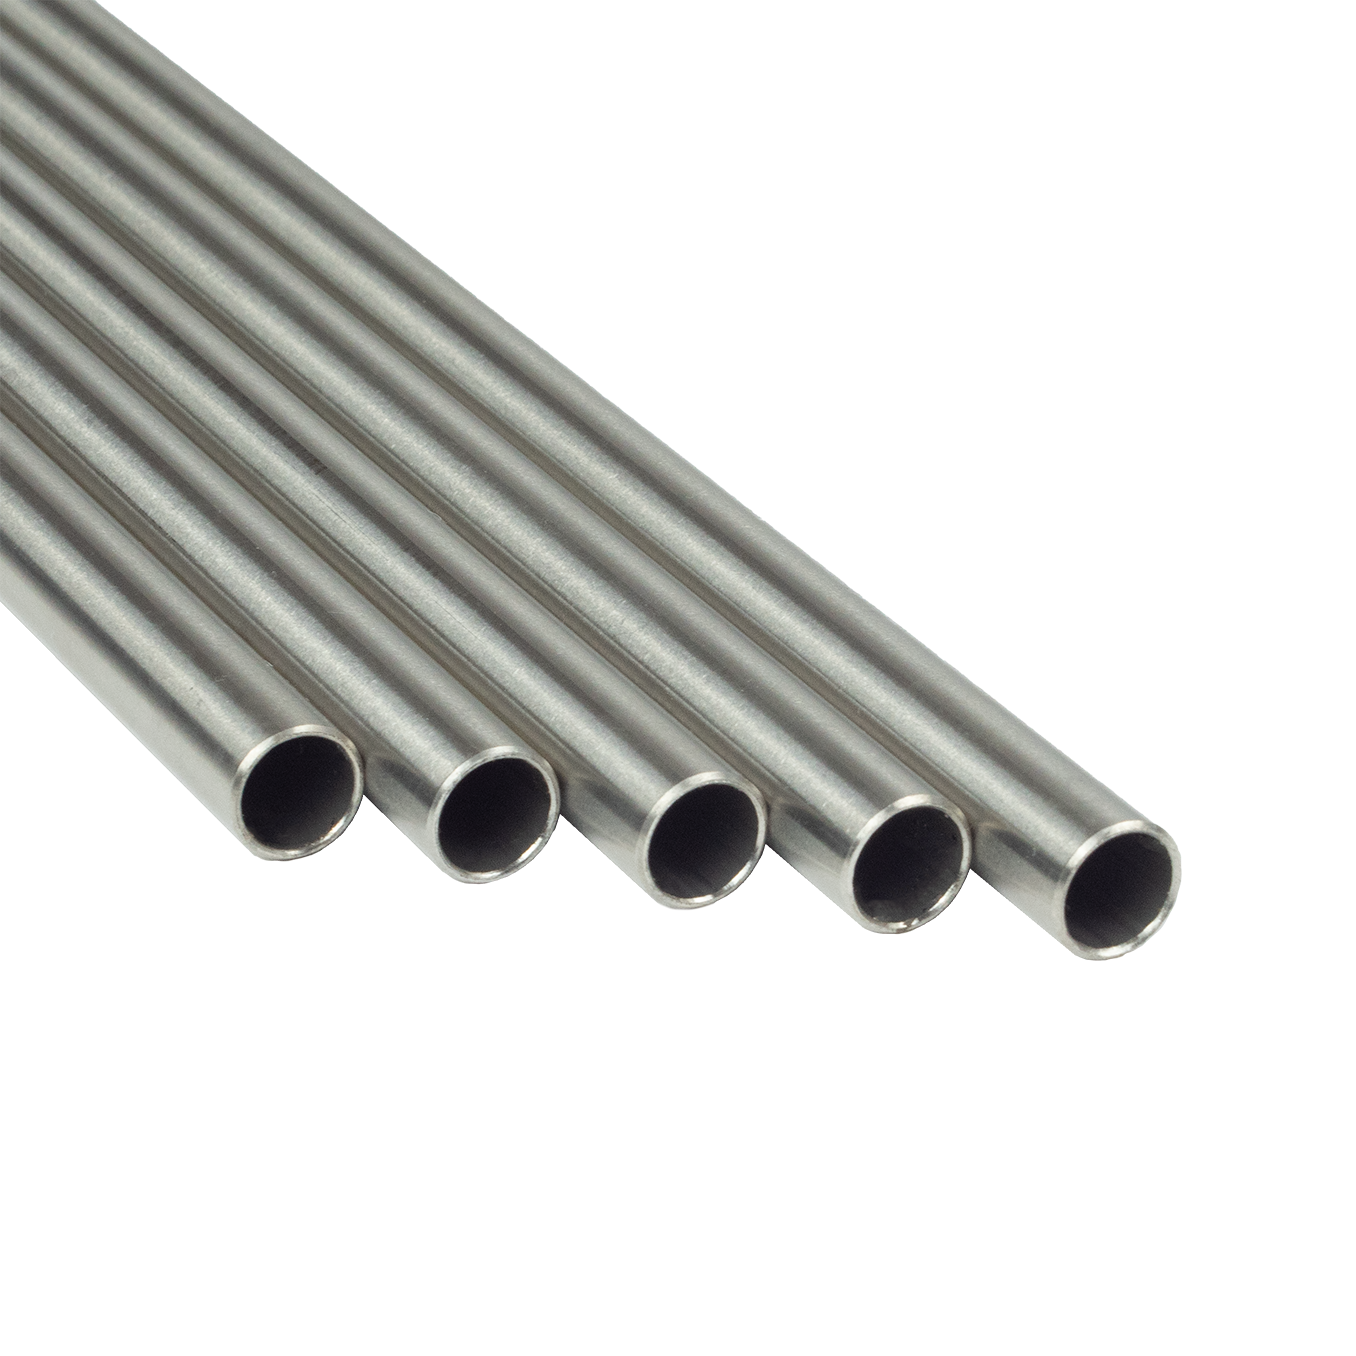 SFS Stand Tube - Ø 10 x 1 mm, length 750 mm - stainless steel